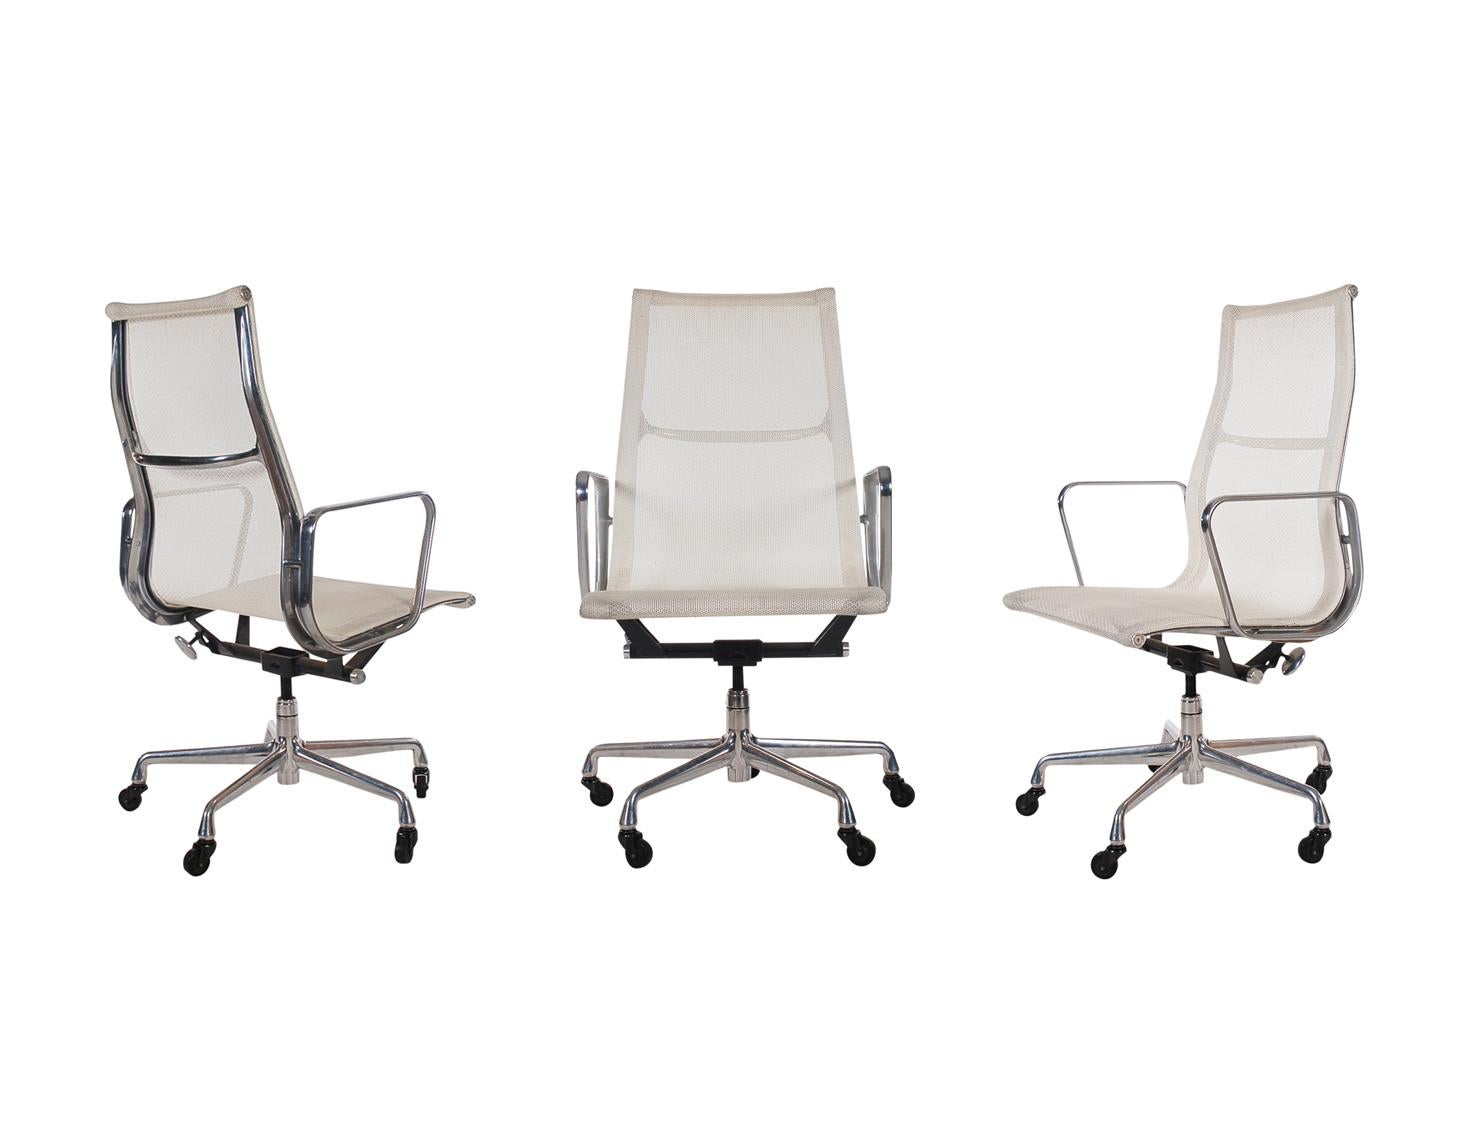 American Set of Four Charles Eames for Herman Miller White Conference Room Office Chairs